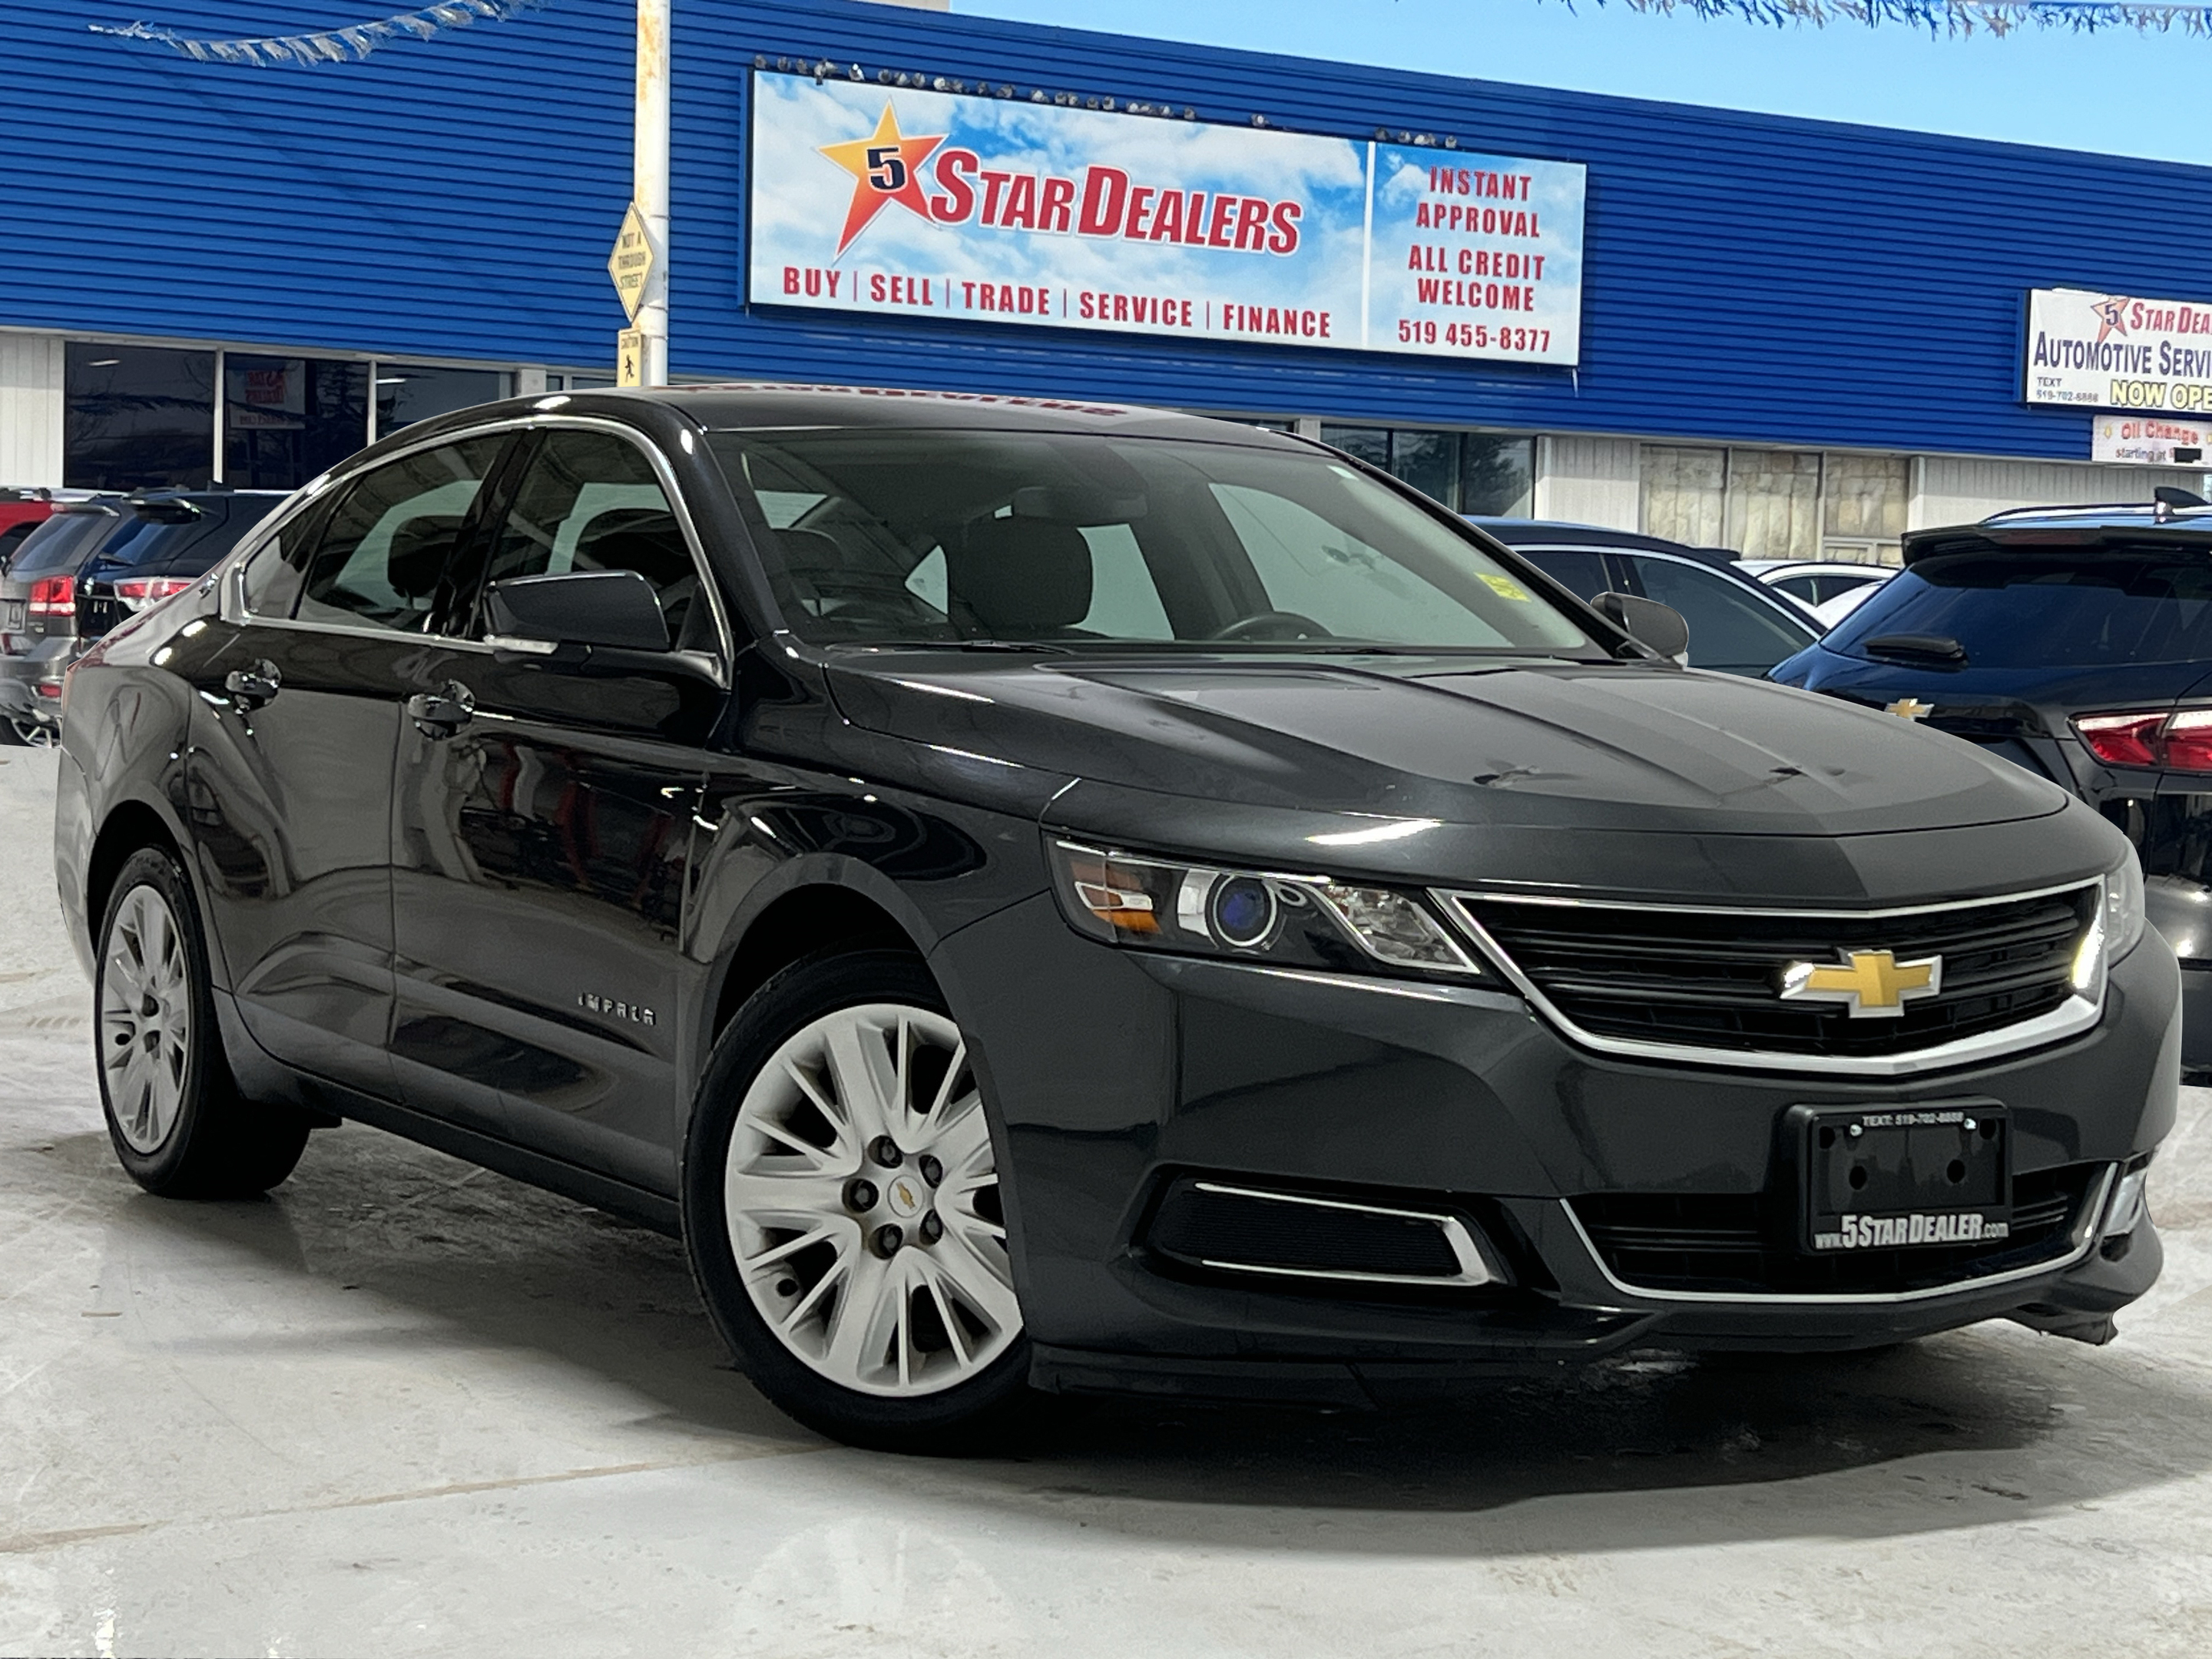 2015 Chevrolet Impala GREAT CONDITION! MUST SEE! WE FINANCE ALL CREDIT!